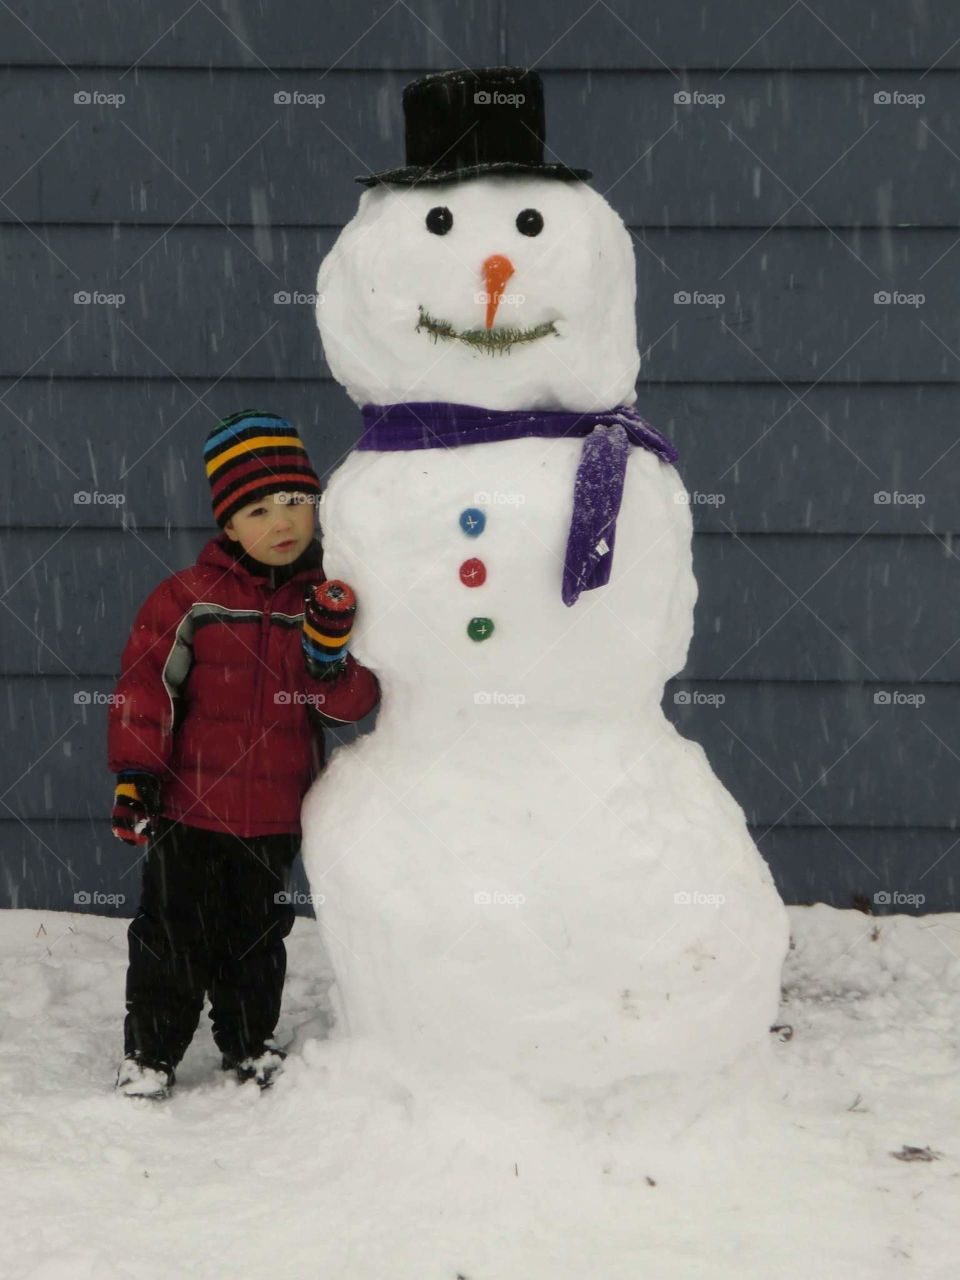 The Perfect Snowman. A snowman my son and I built together,  one snowy afternoon